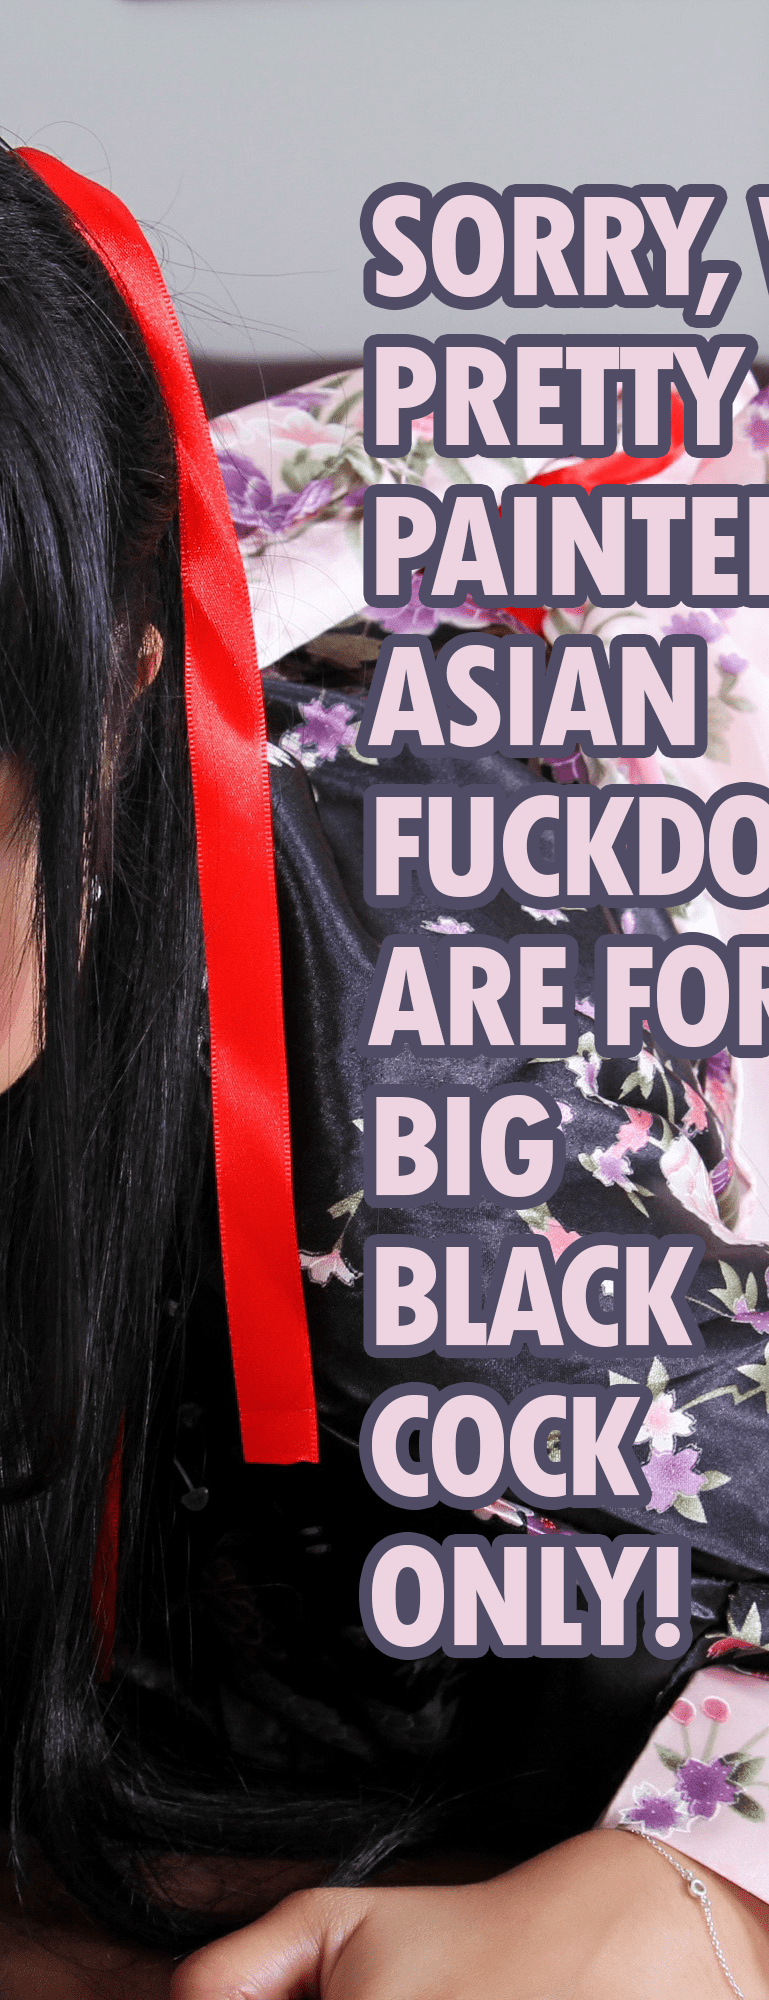 https://blackcockcult.com/wp-content/uploads/2019/06/asians-are-for-big-black-cock-only-4-769x2000.png